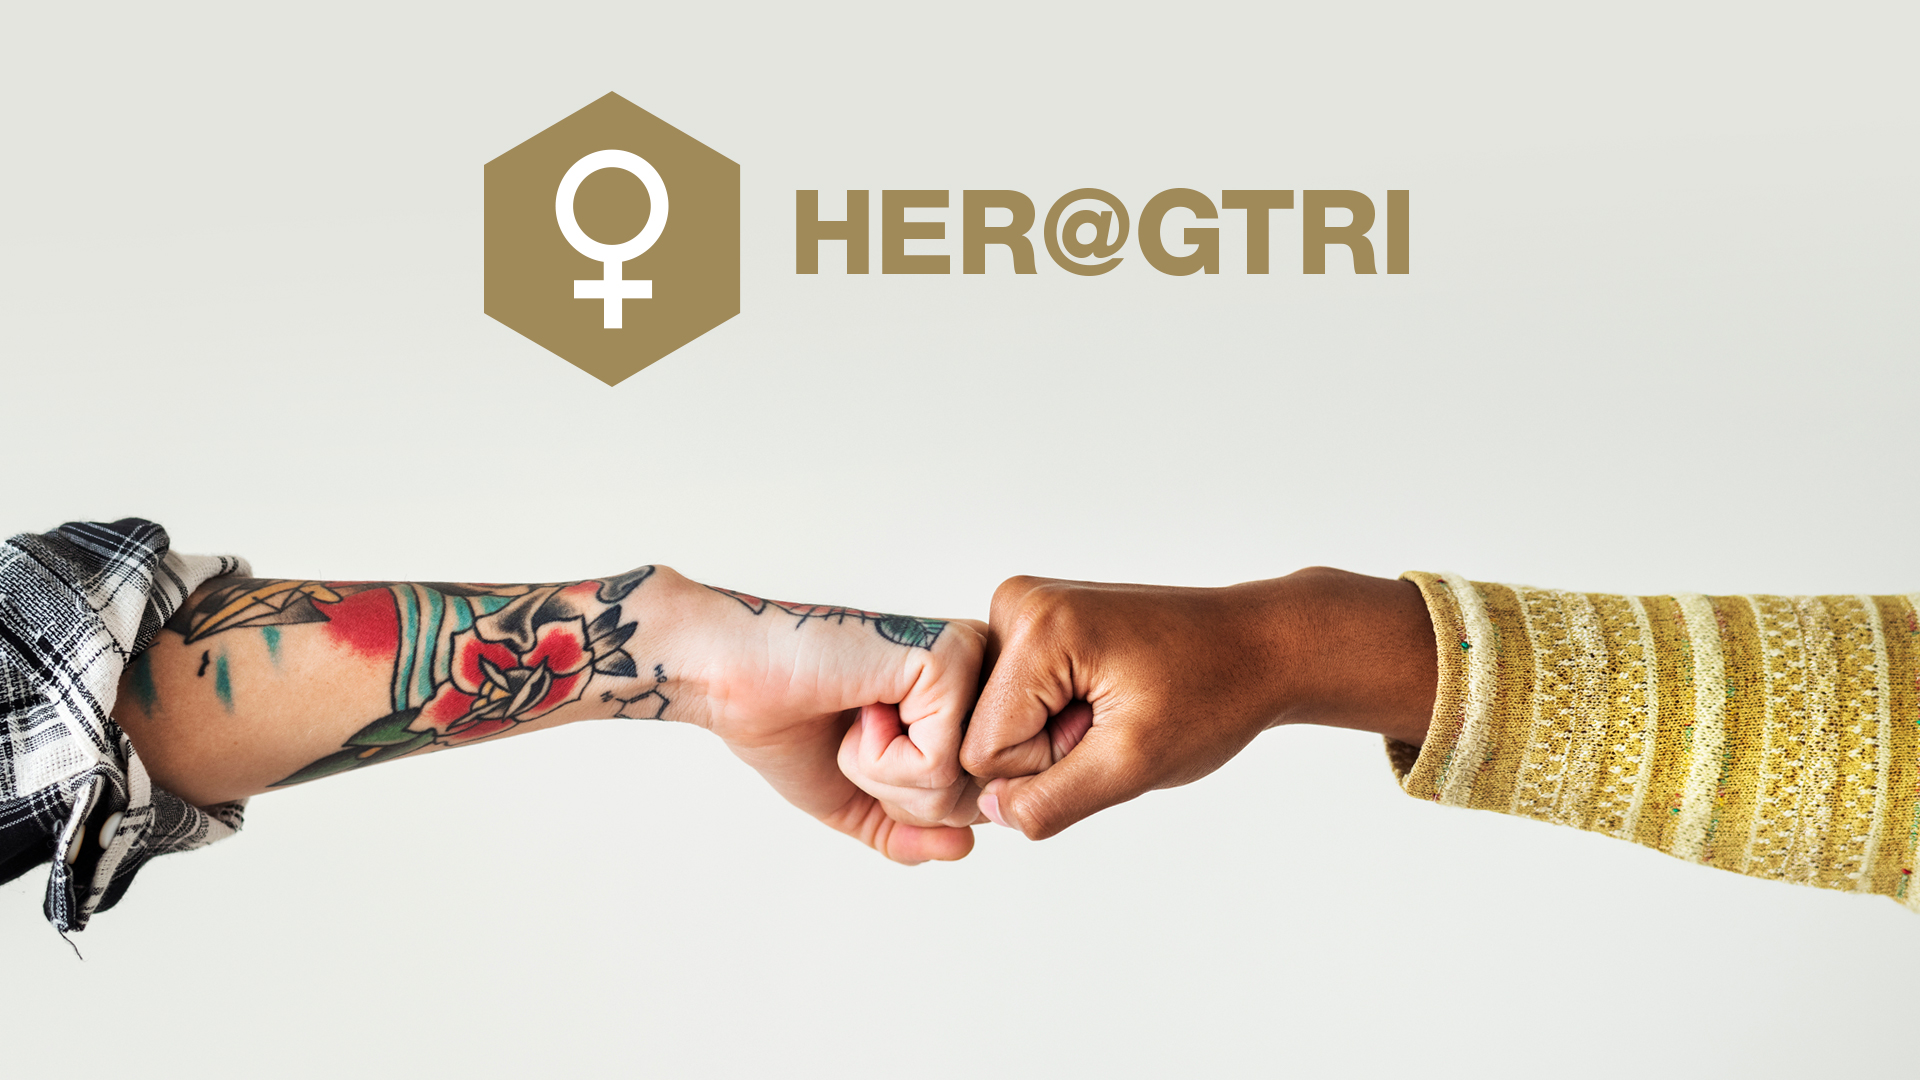 HER@GTRI is one of the six employee resource groups at GTRI that drive opportunities for employee engagement, education and training, recruitment, retention, and community outreach.